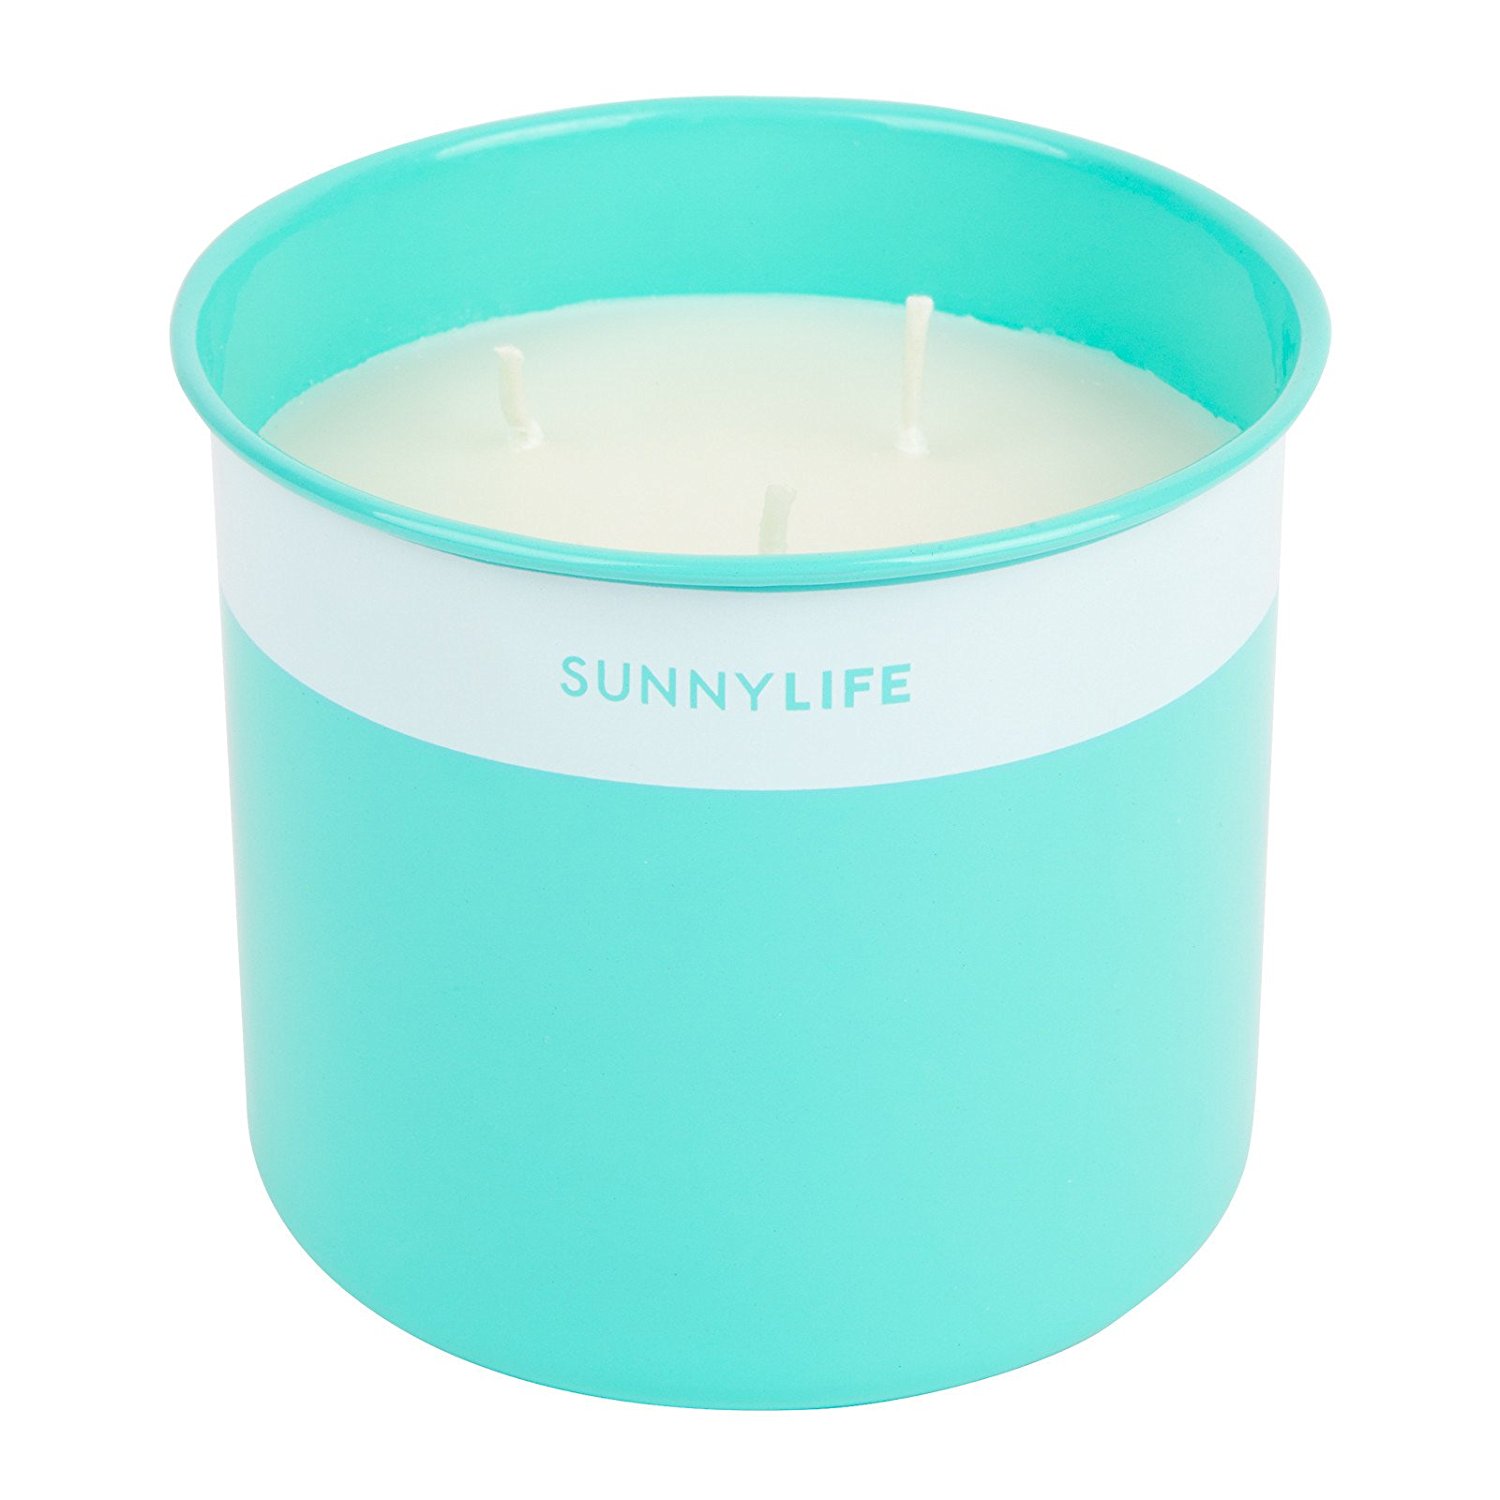 Sunnylife Outdoor Citronella Scented Wax Candle, Keep Mosquitos and Bugs Away - Turquoise, Large